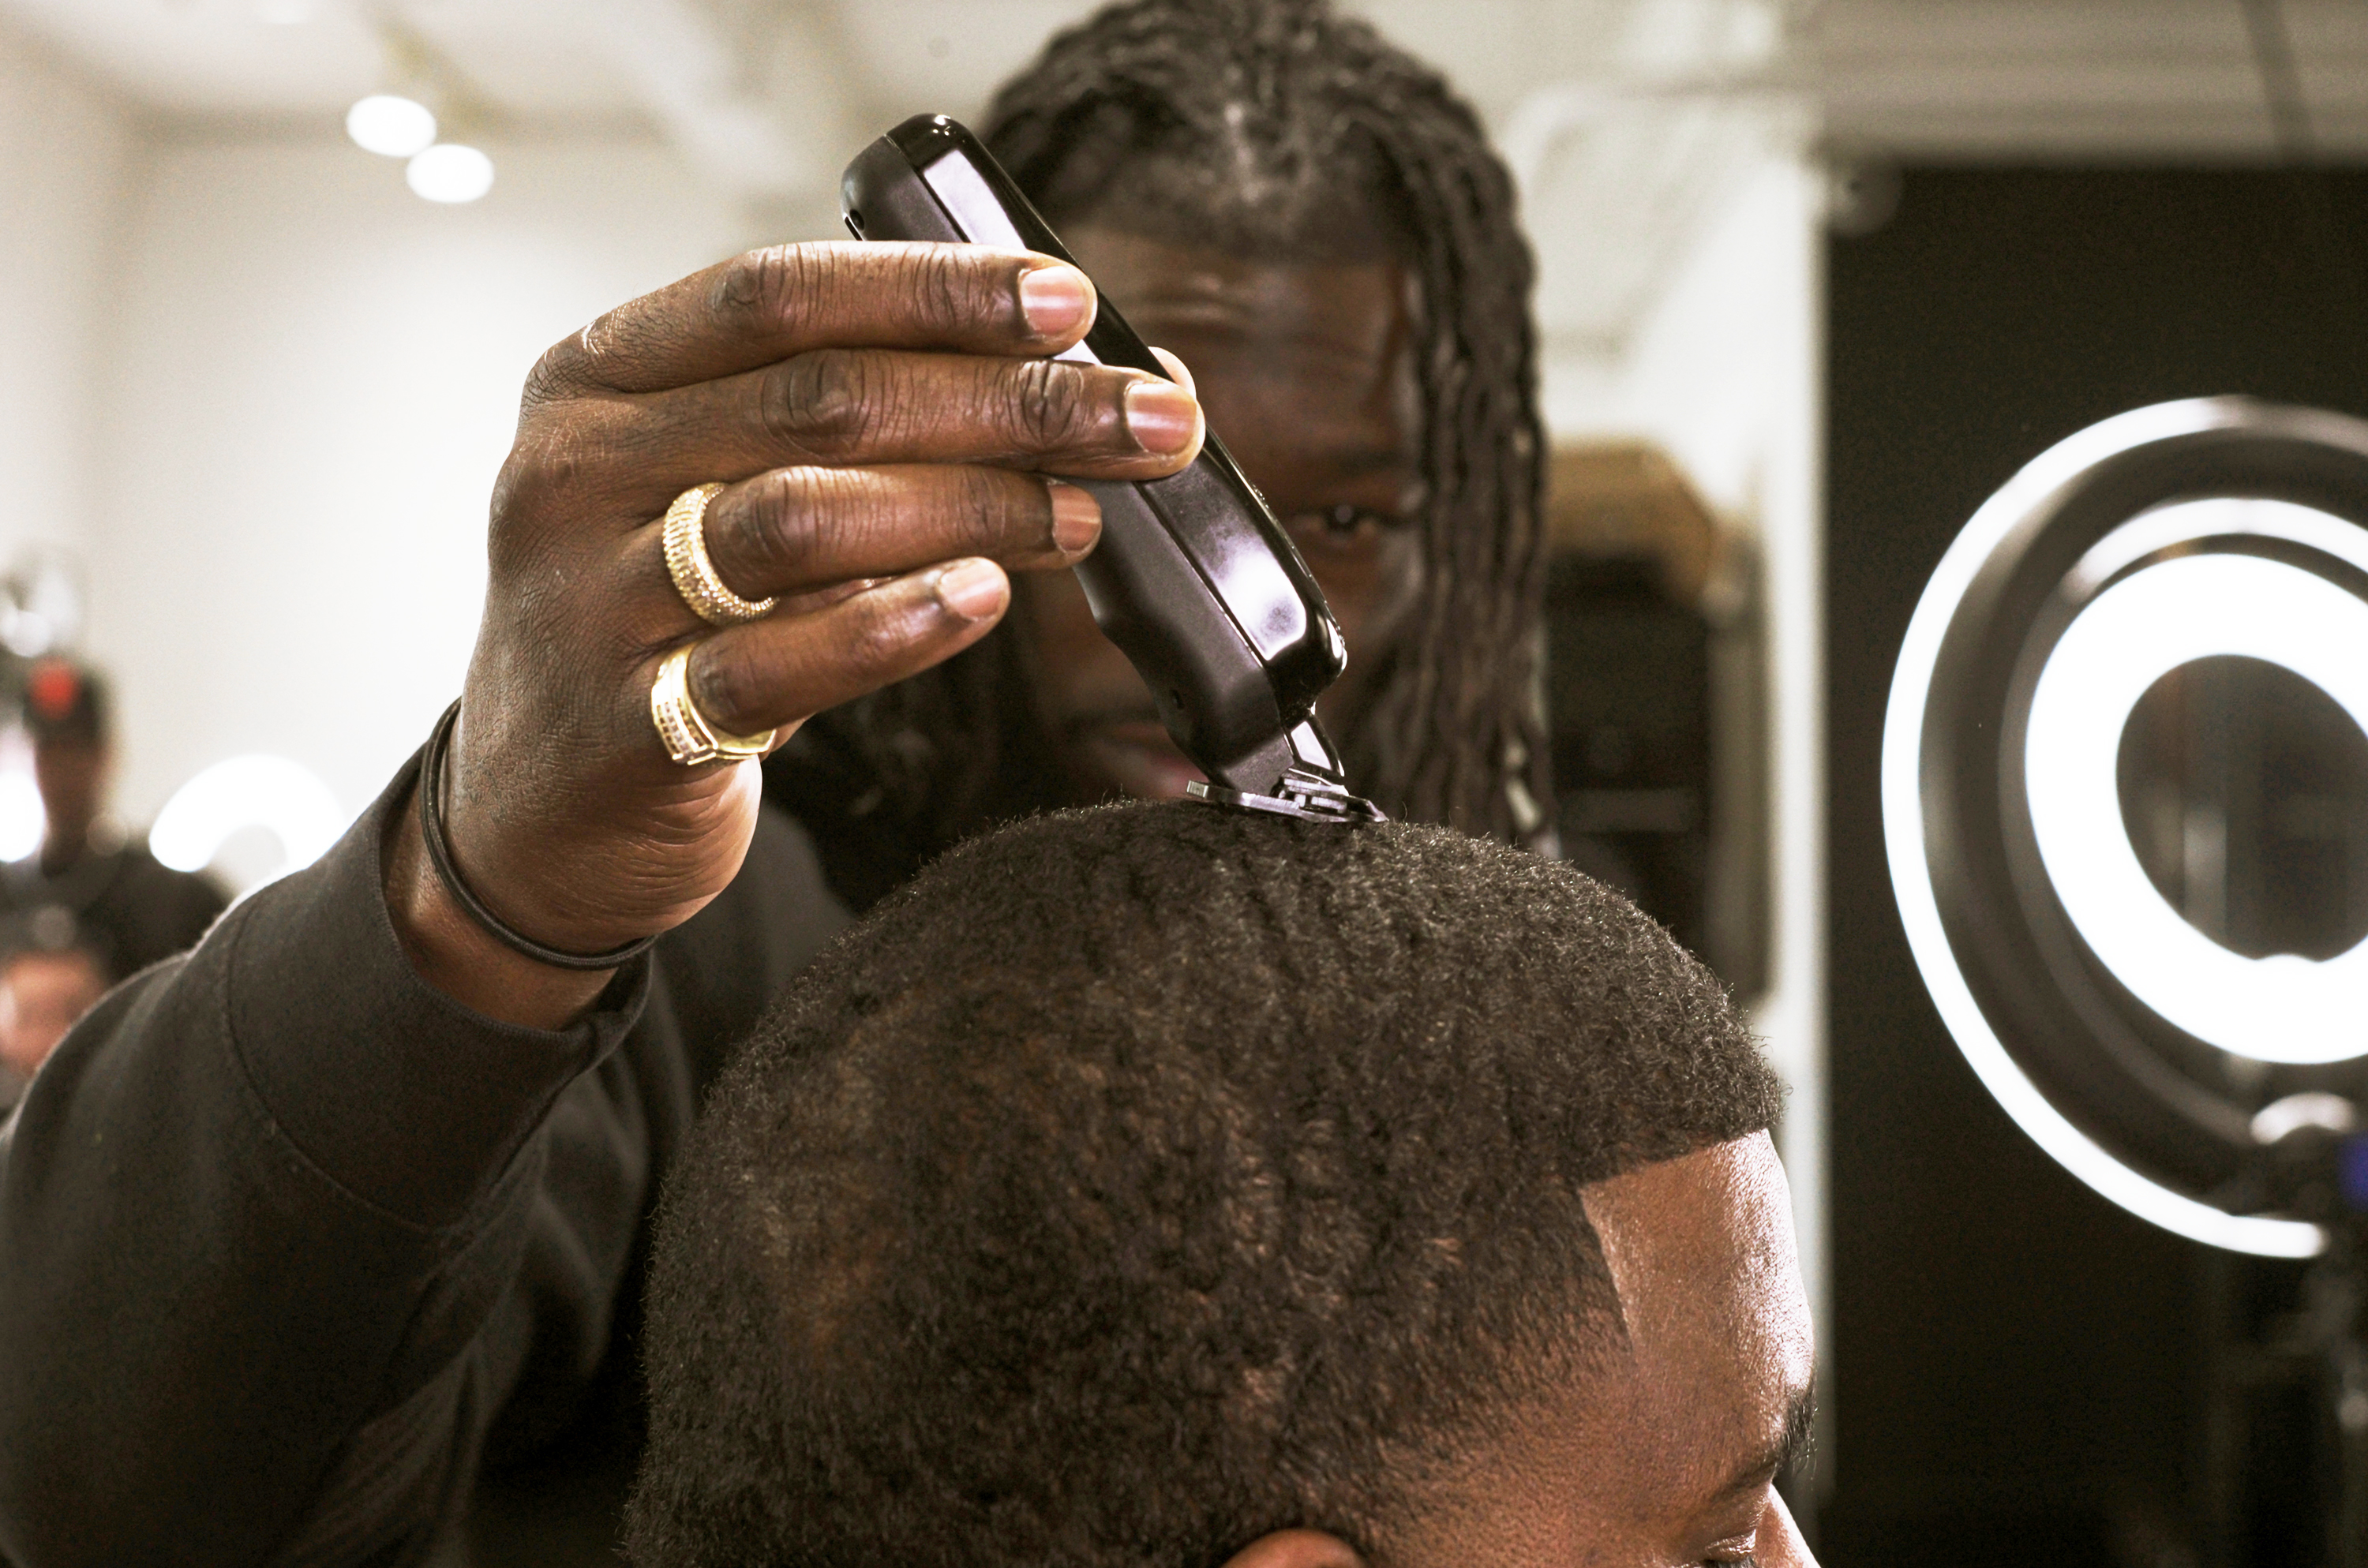 A barber with braided hair trims a client's hair with clippers in a salon.